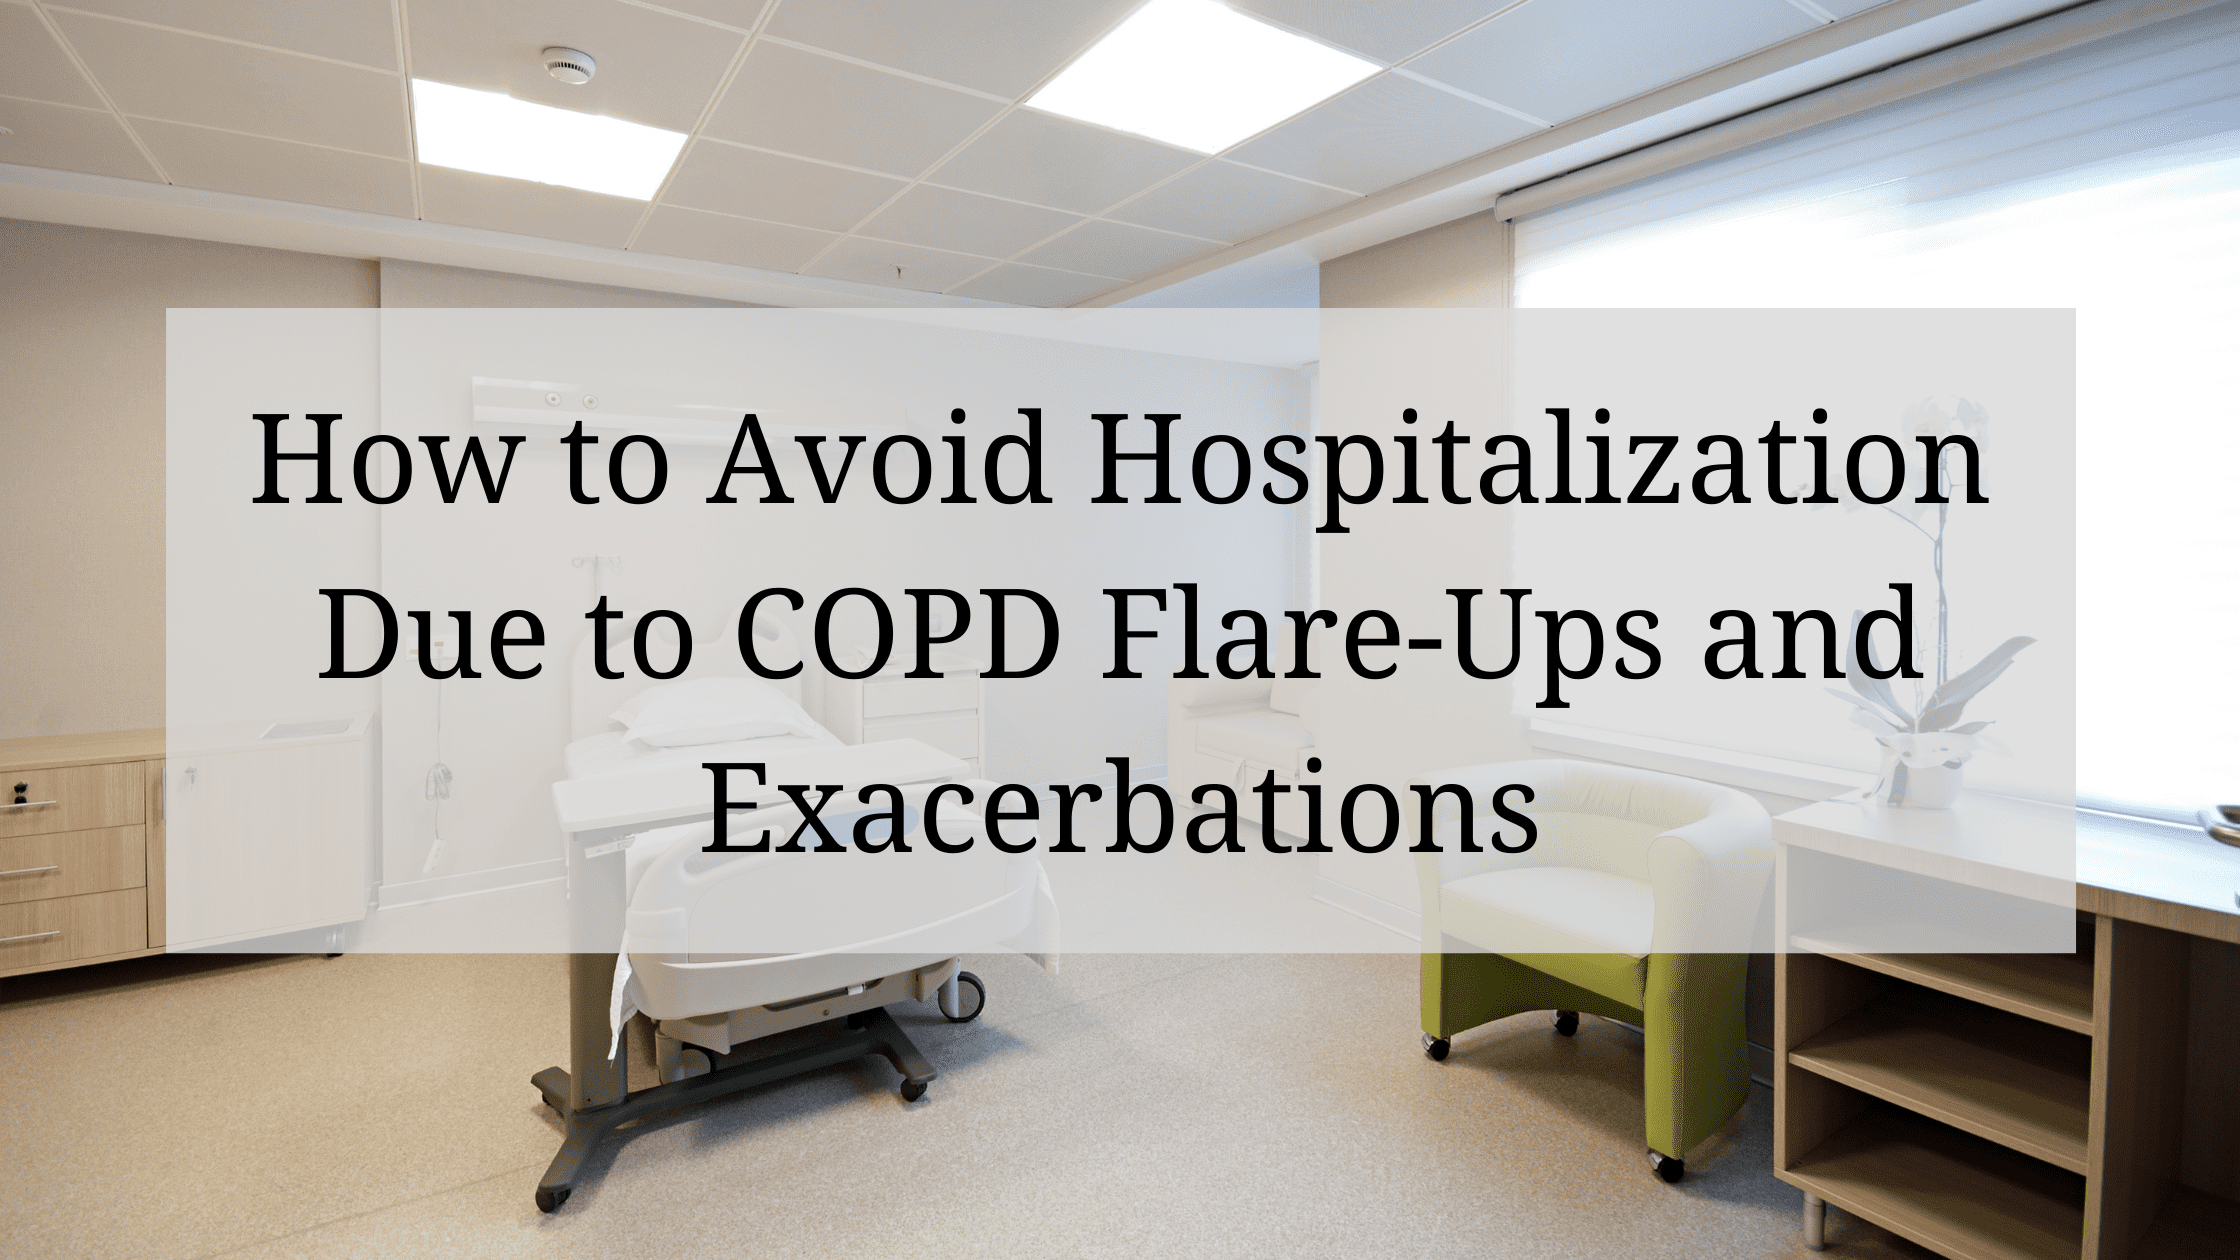 How to Avoid Hospitalization Due to COPD Flare-Ups and Exacerbations